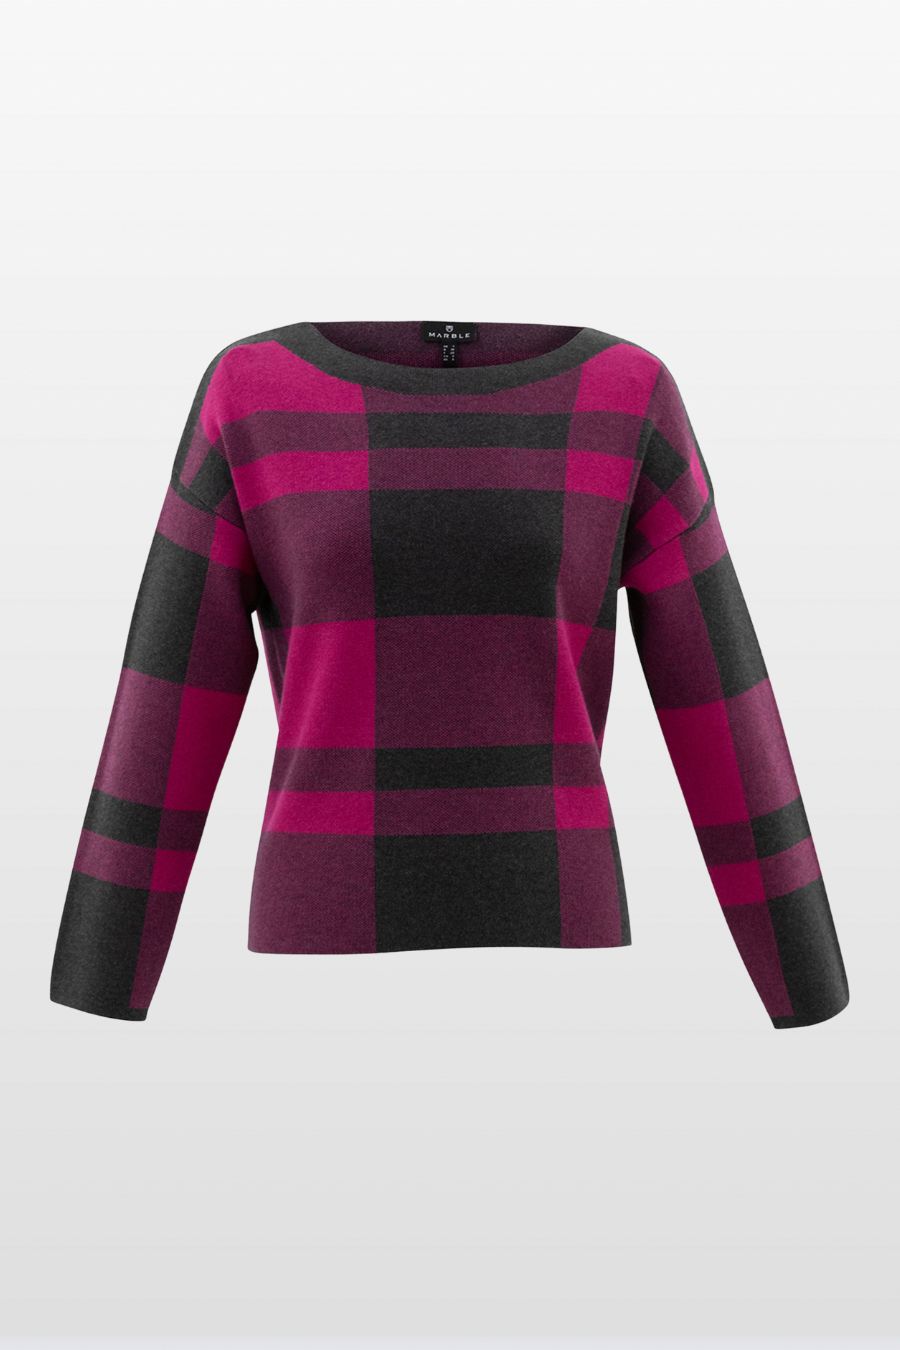 Jacquard Check Sweater ONLINE ONLY